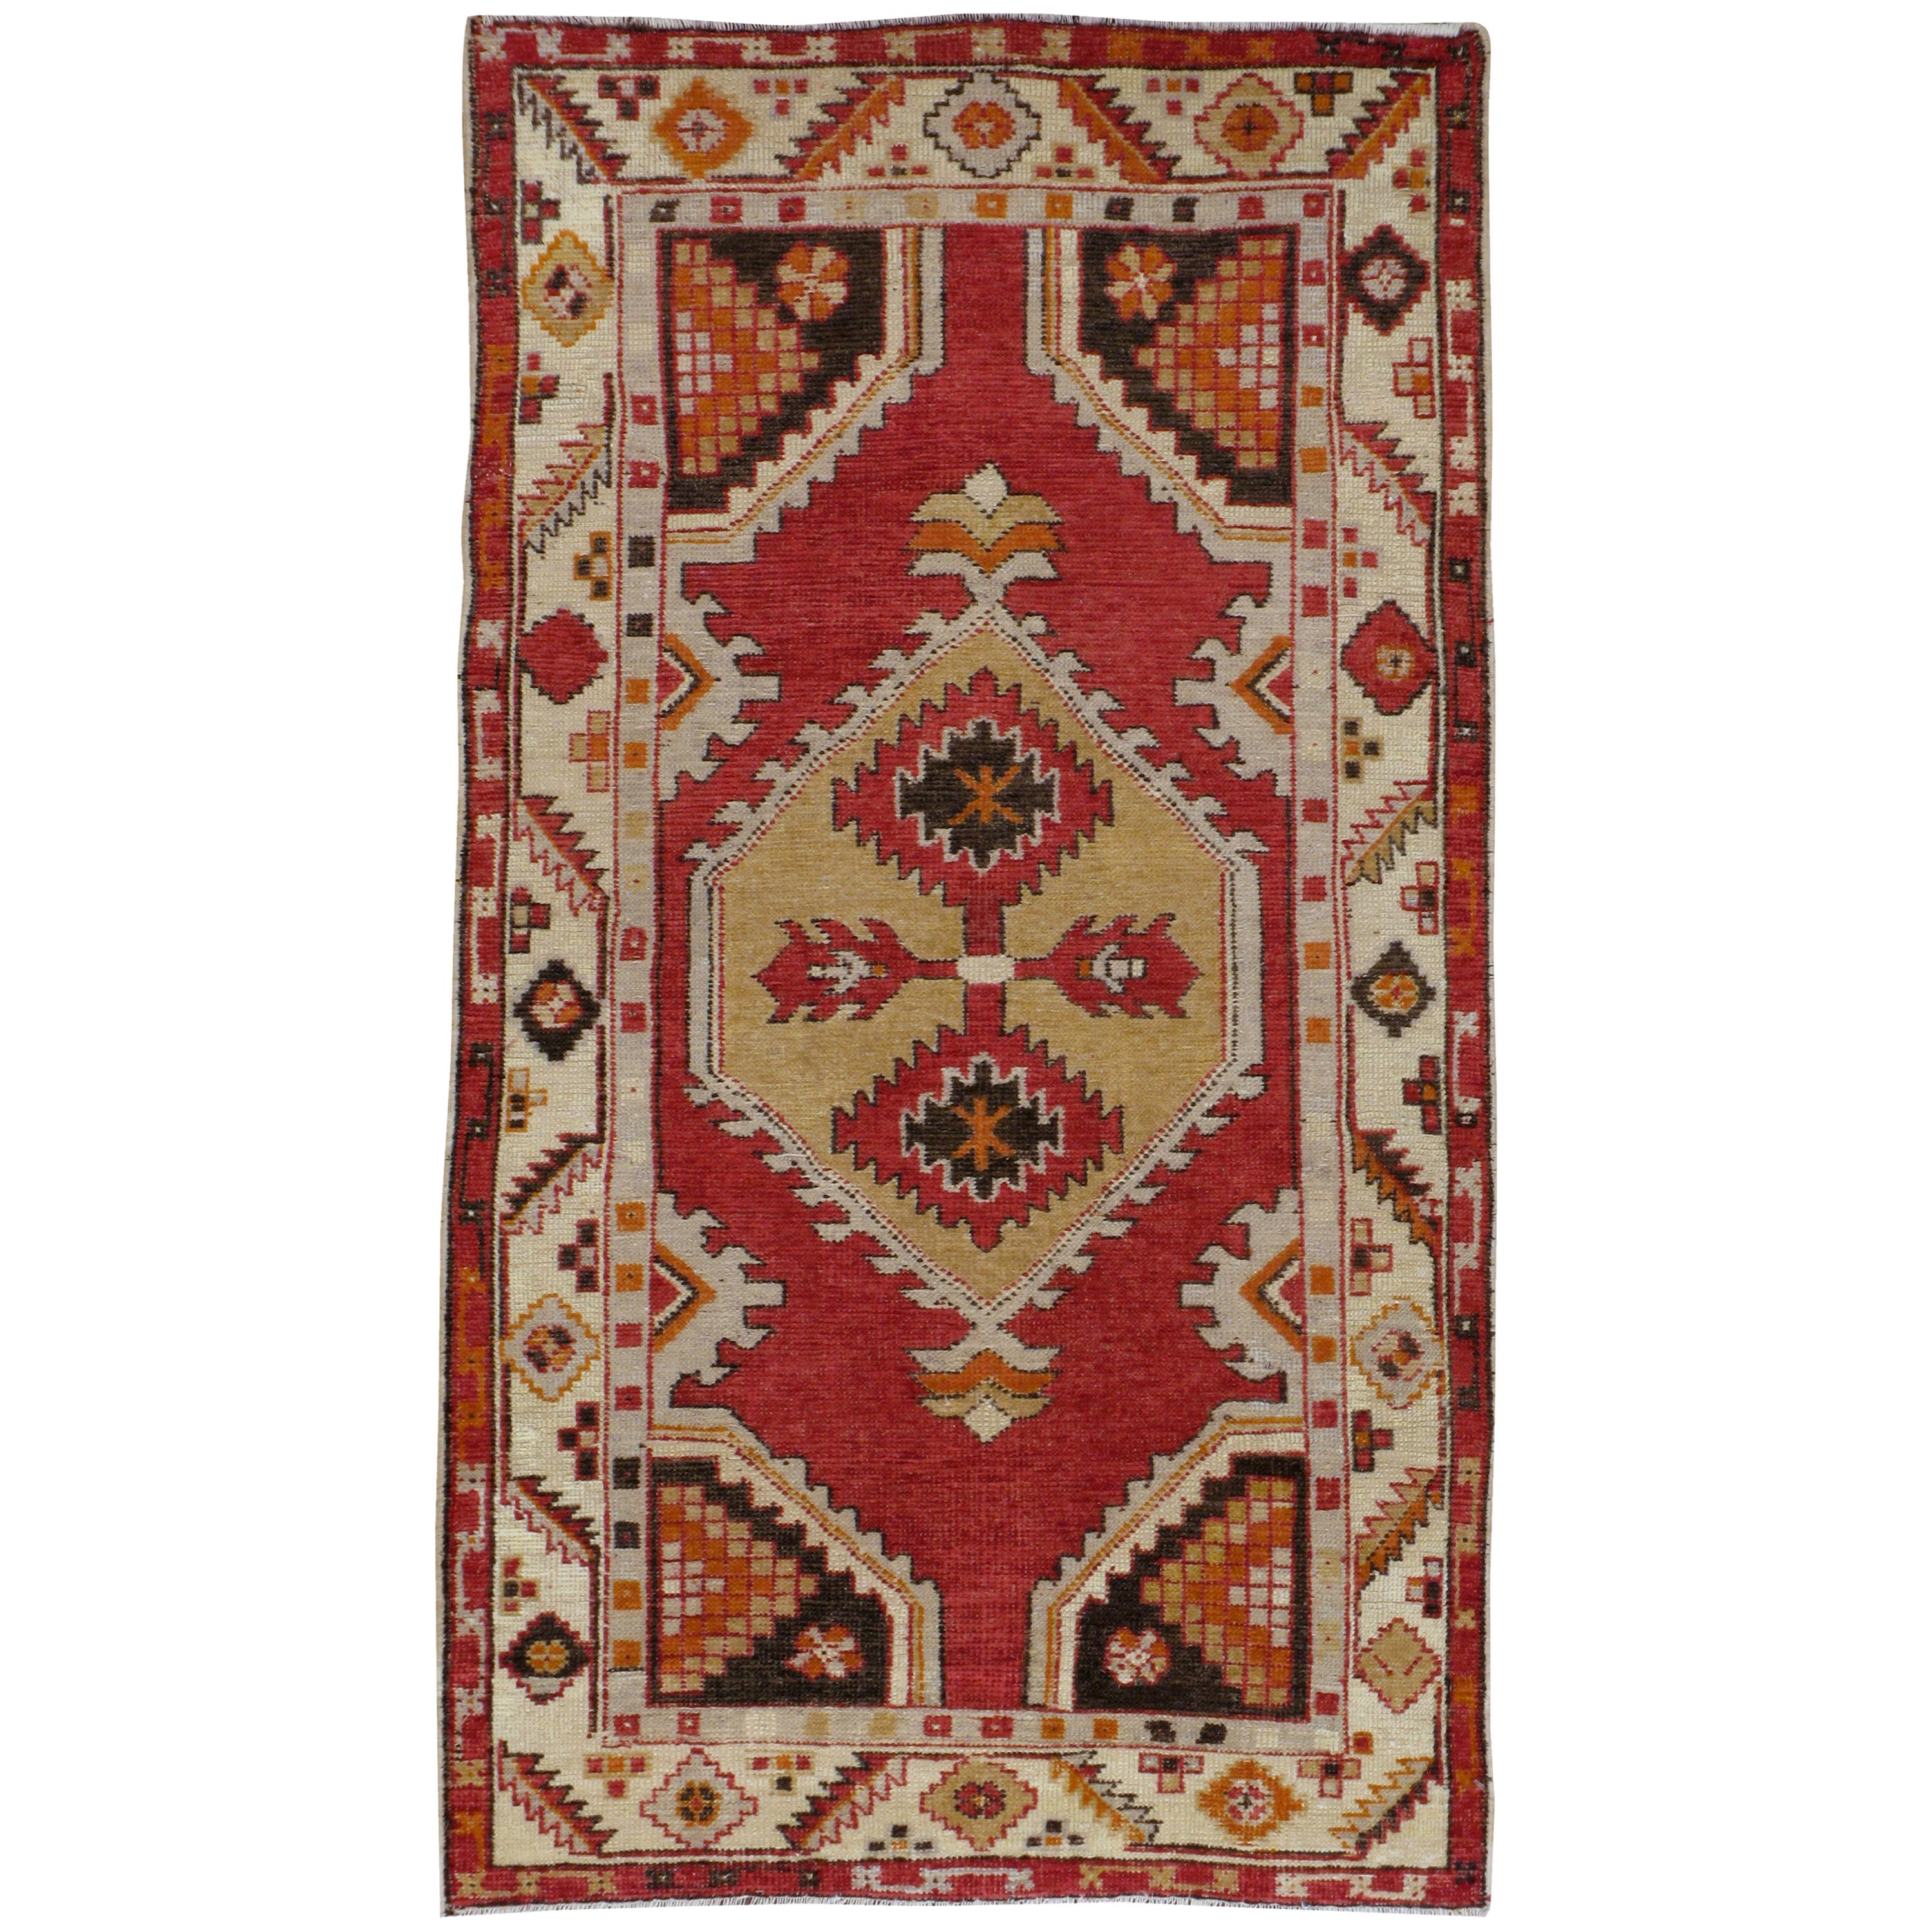 Midcentury Handmade Turkish Oushak Throw Rug In Red and Ivory